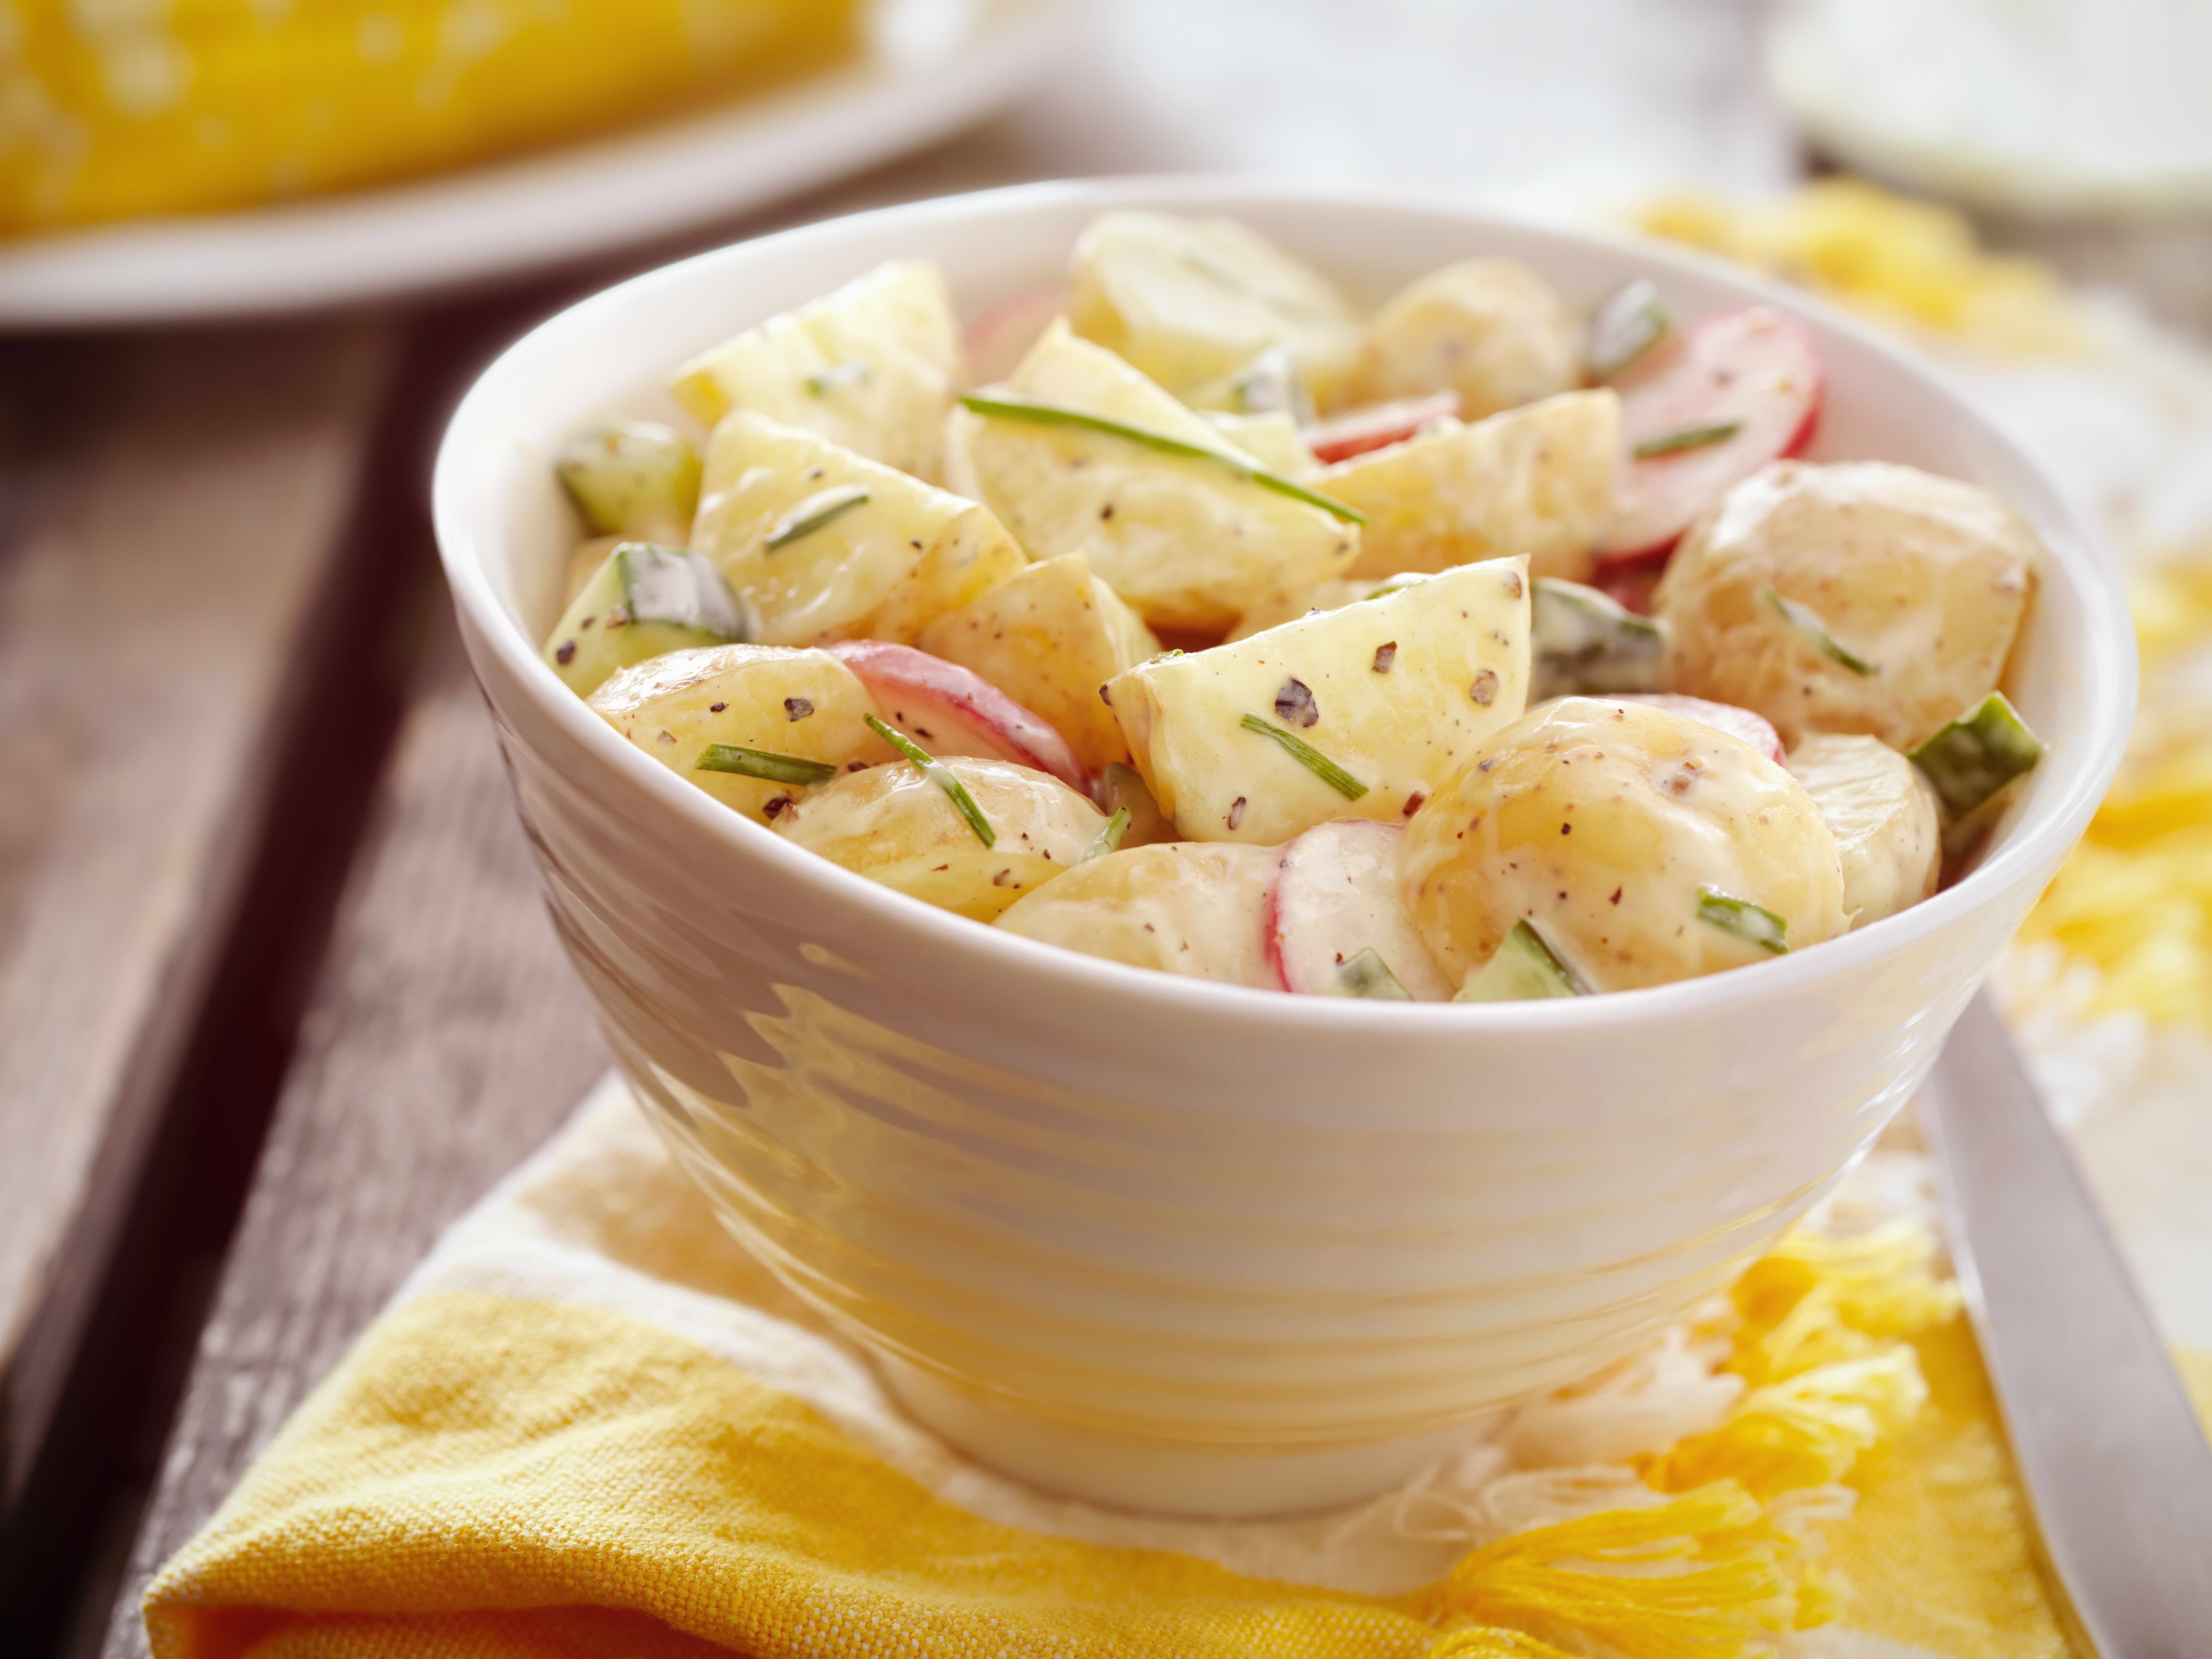 Potato salad with radishes and cucumbers